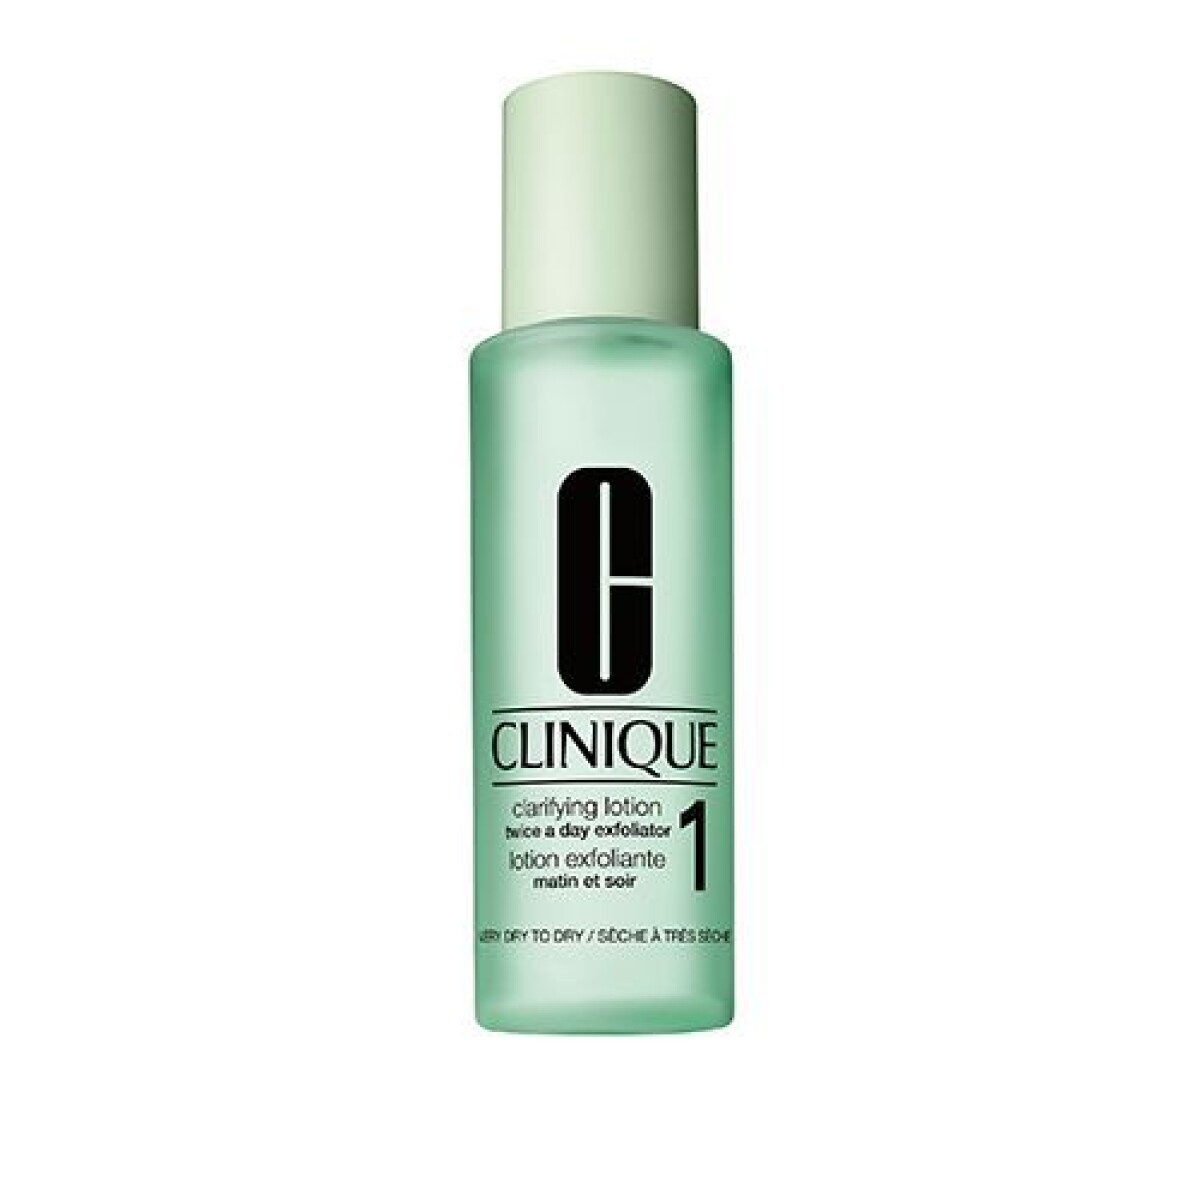 Clinique Clarifying Lotion 1 400 ml 